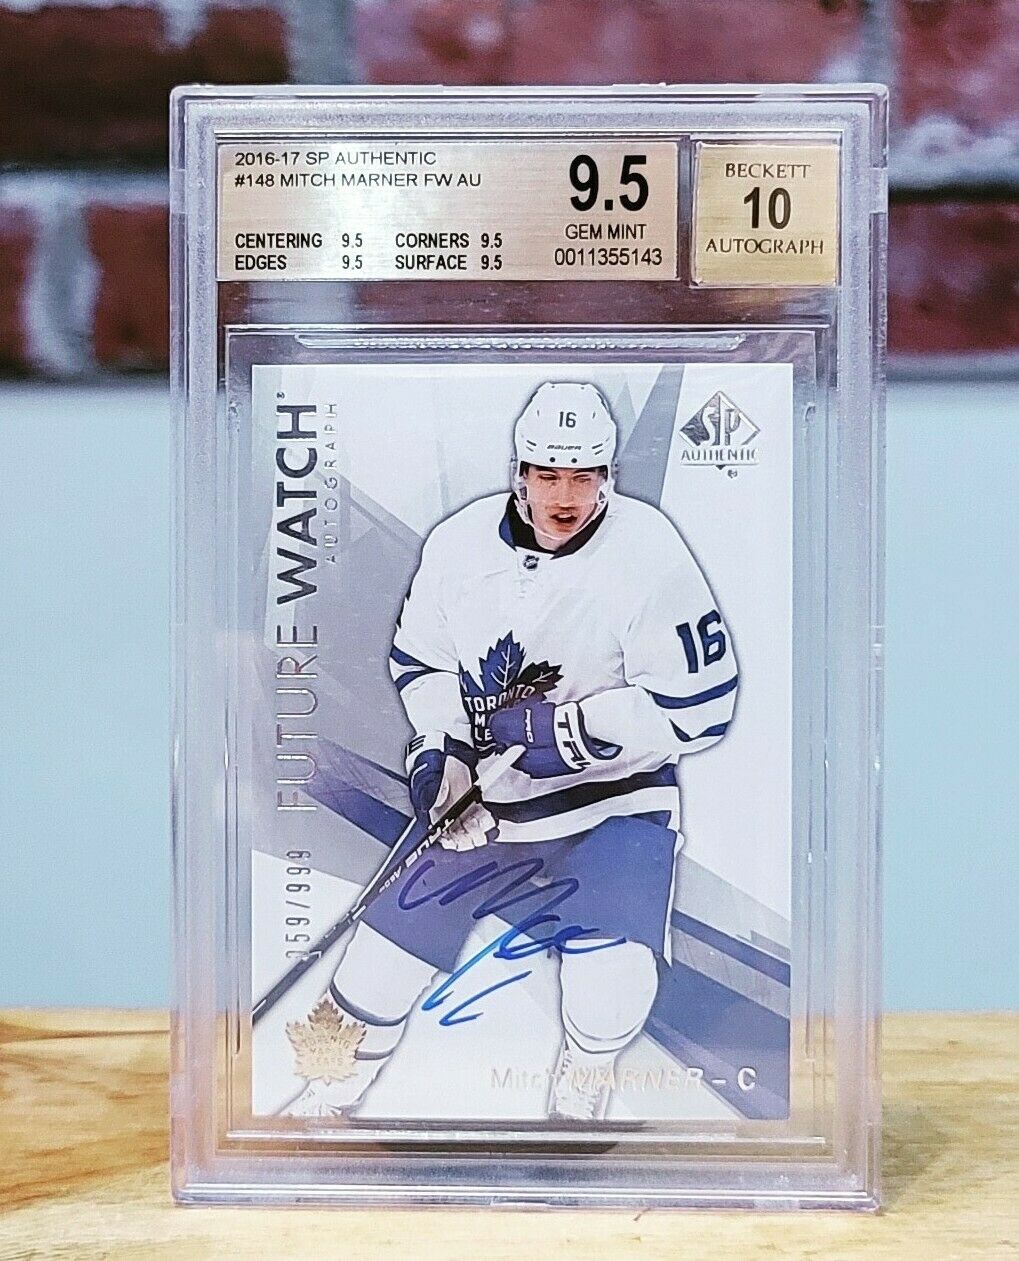 2016/17 SP Authentic Mitch Marner Future Watch Auto Rookie #148 BGS 9.5 🔥🔥🔥